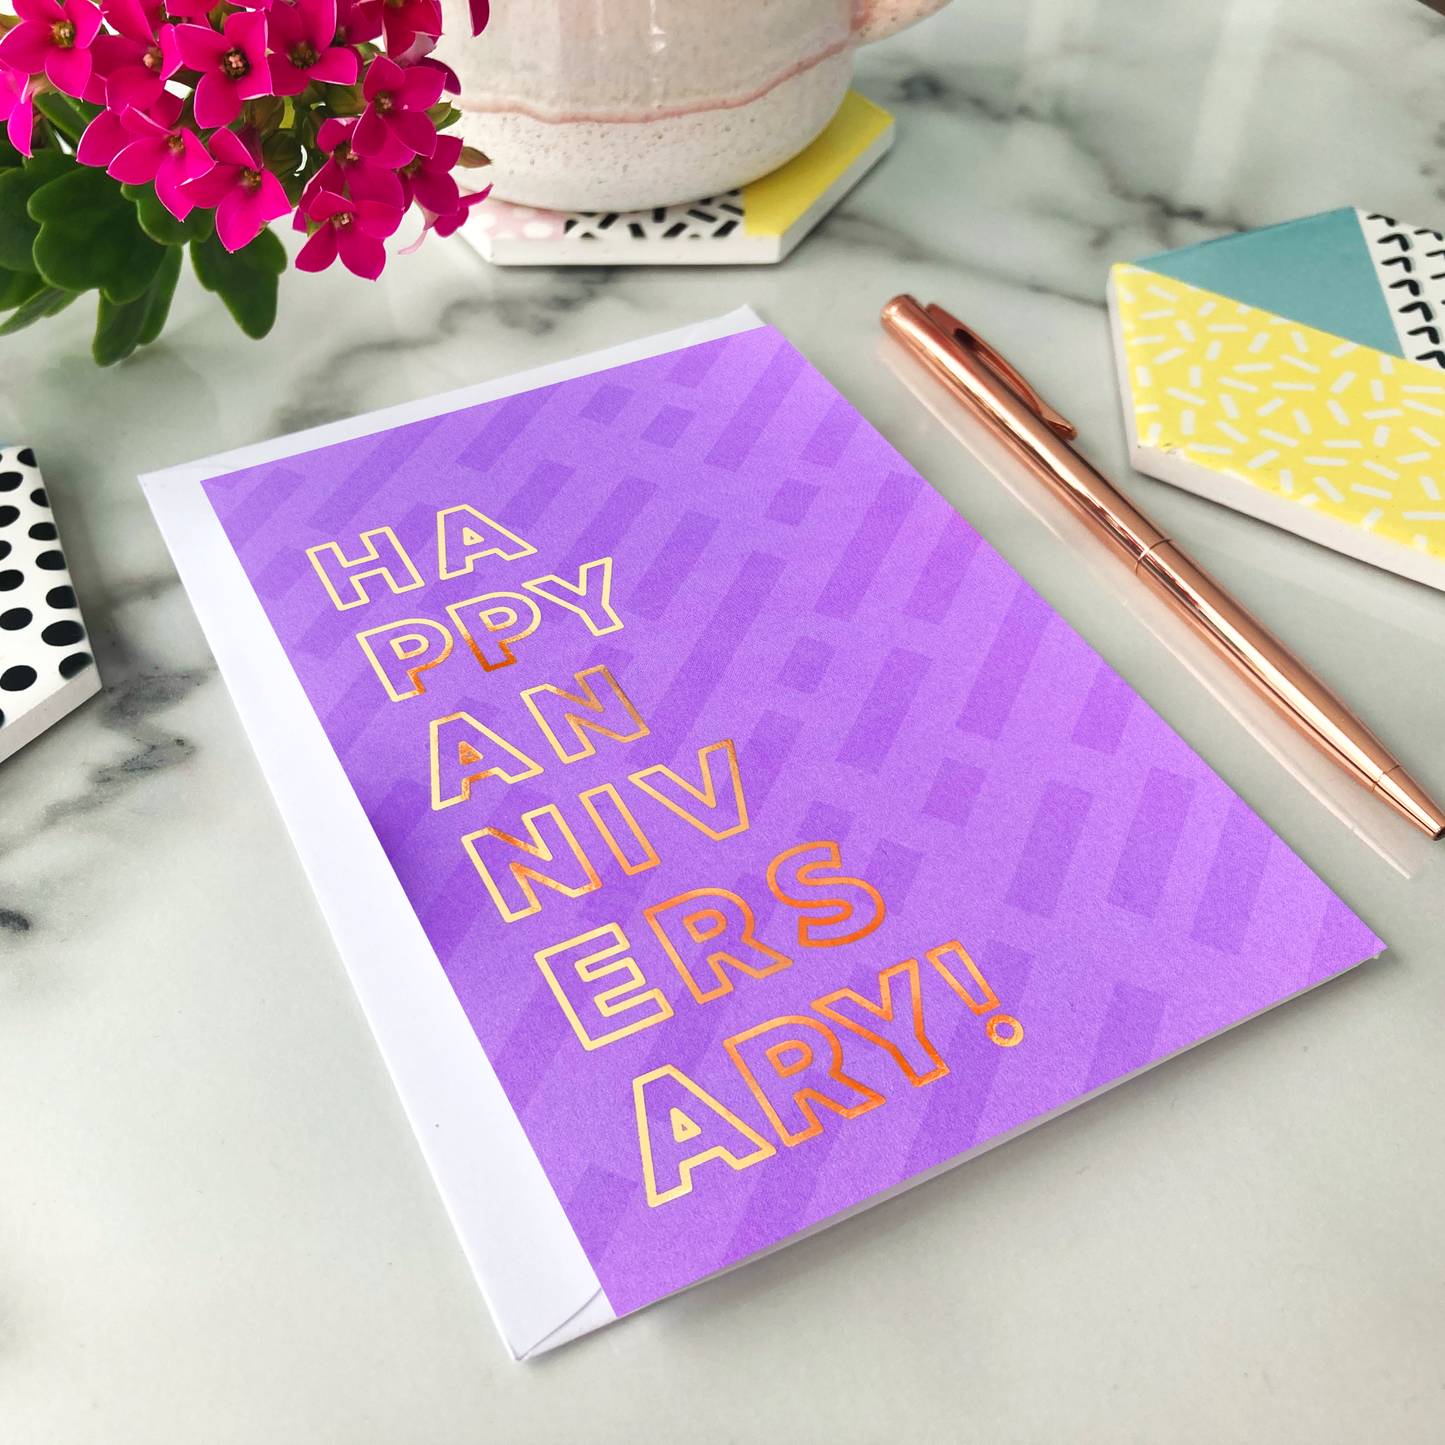 Happy Anniversary Foil Greeting Card